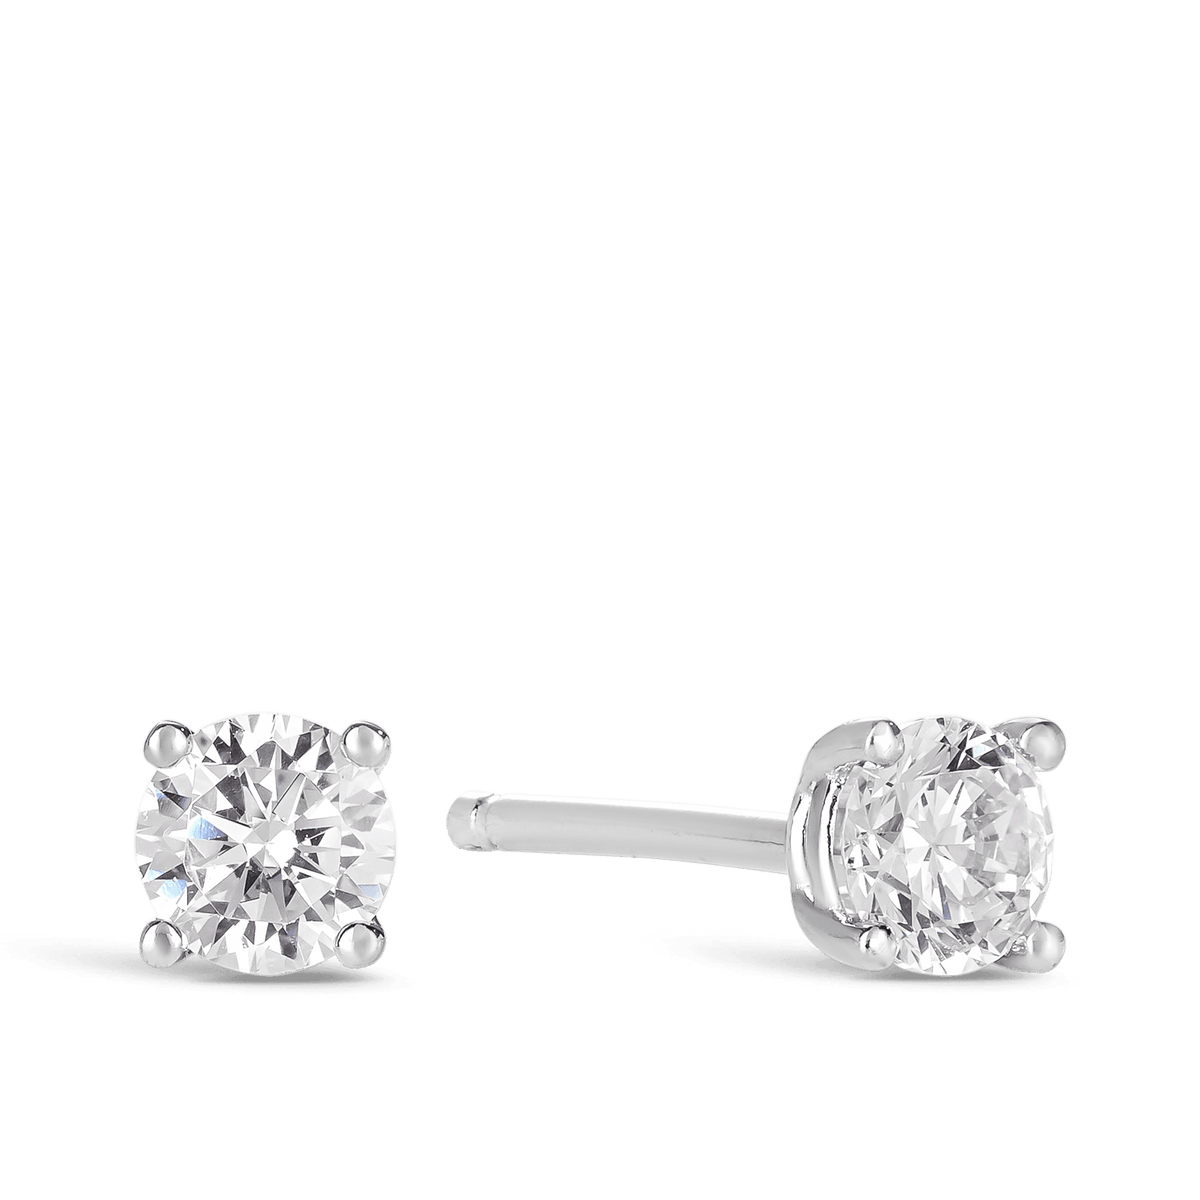 Cubic Zirconia Solitaire Stud Earrings in Sterling Silver - Wallace Bishop